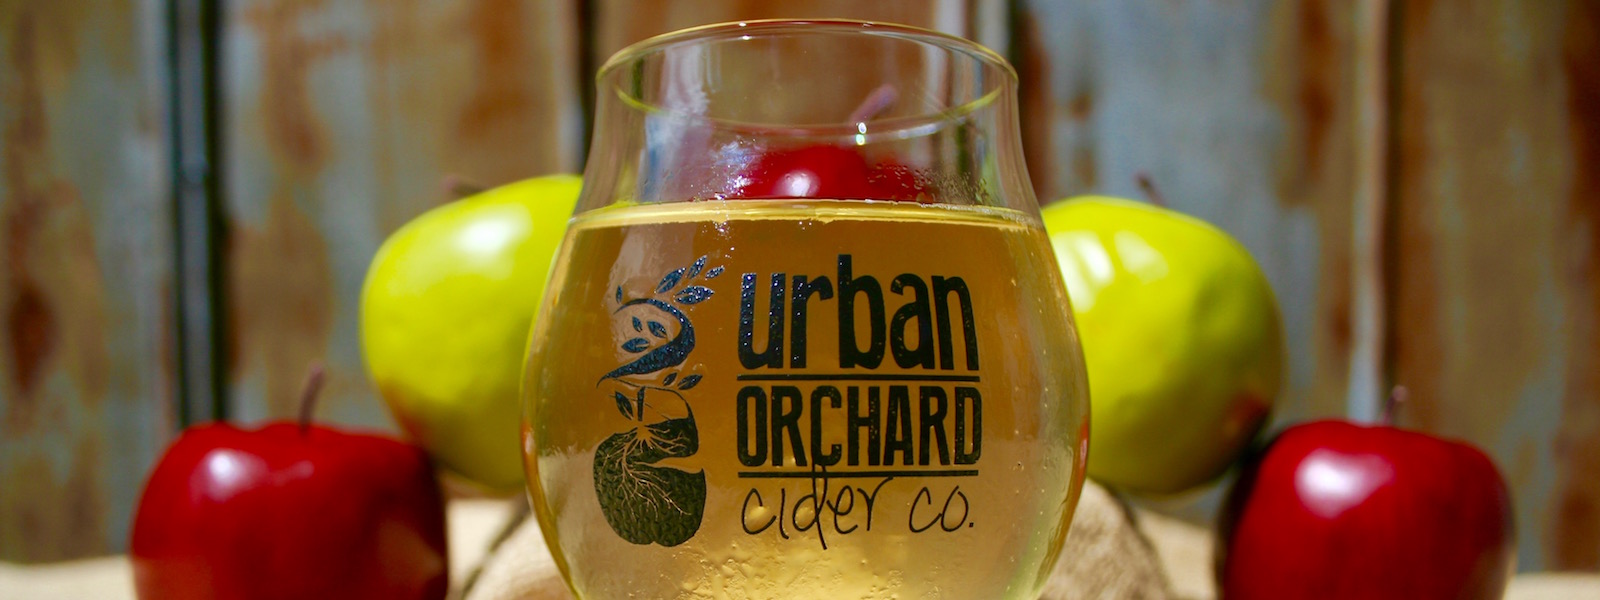 Cider and Beer in Asheville NC - Urban Orchard Cider